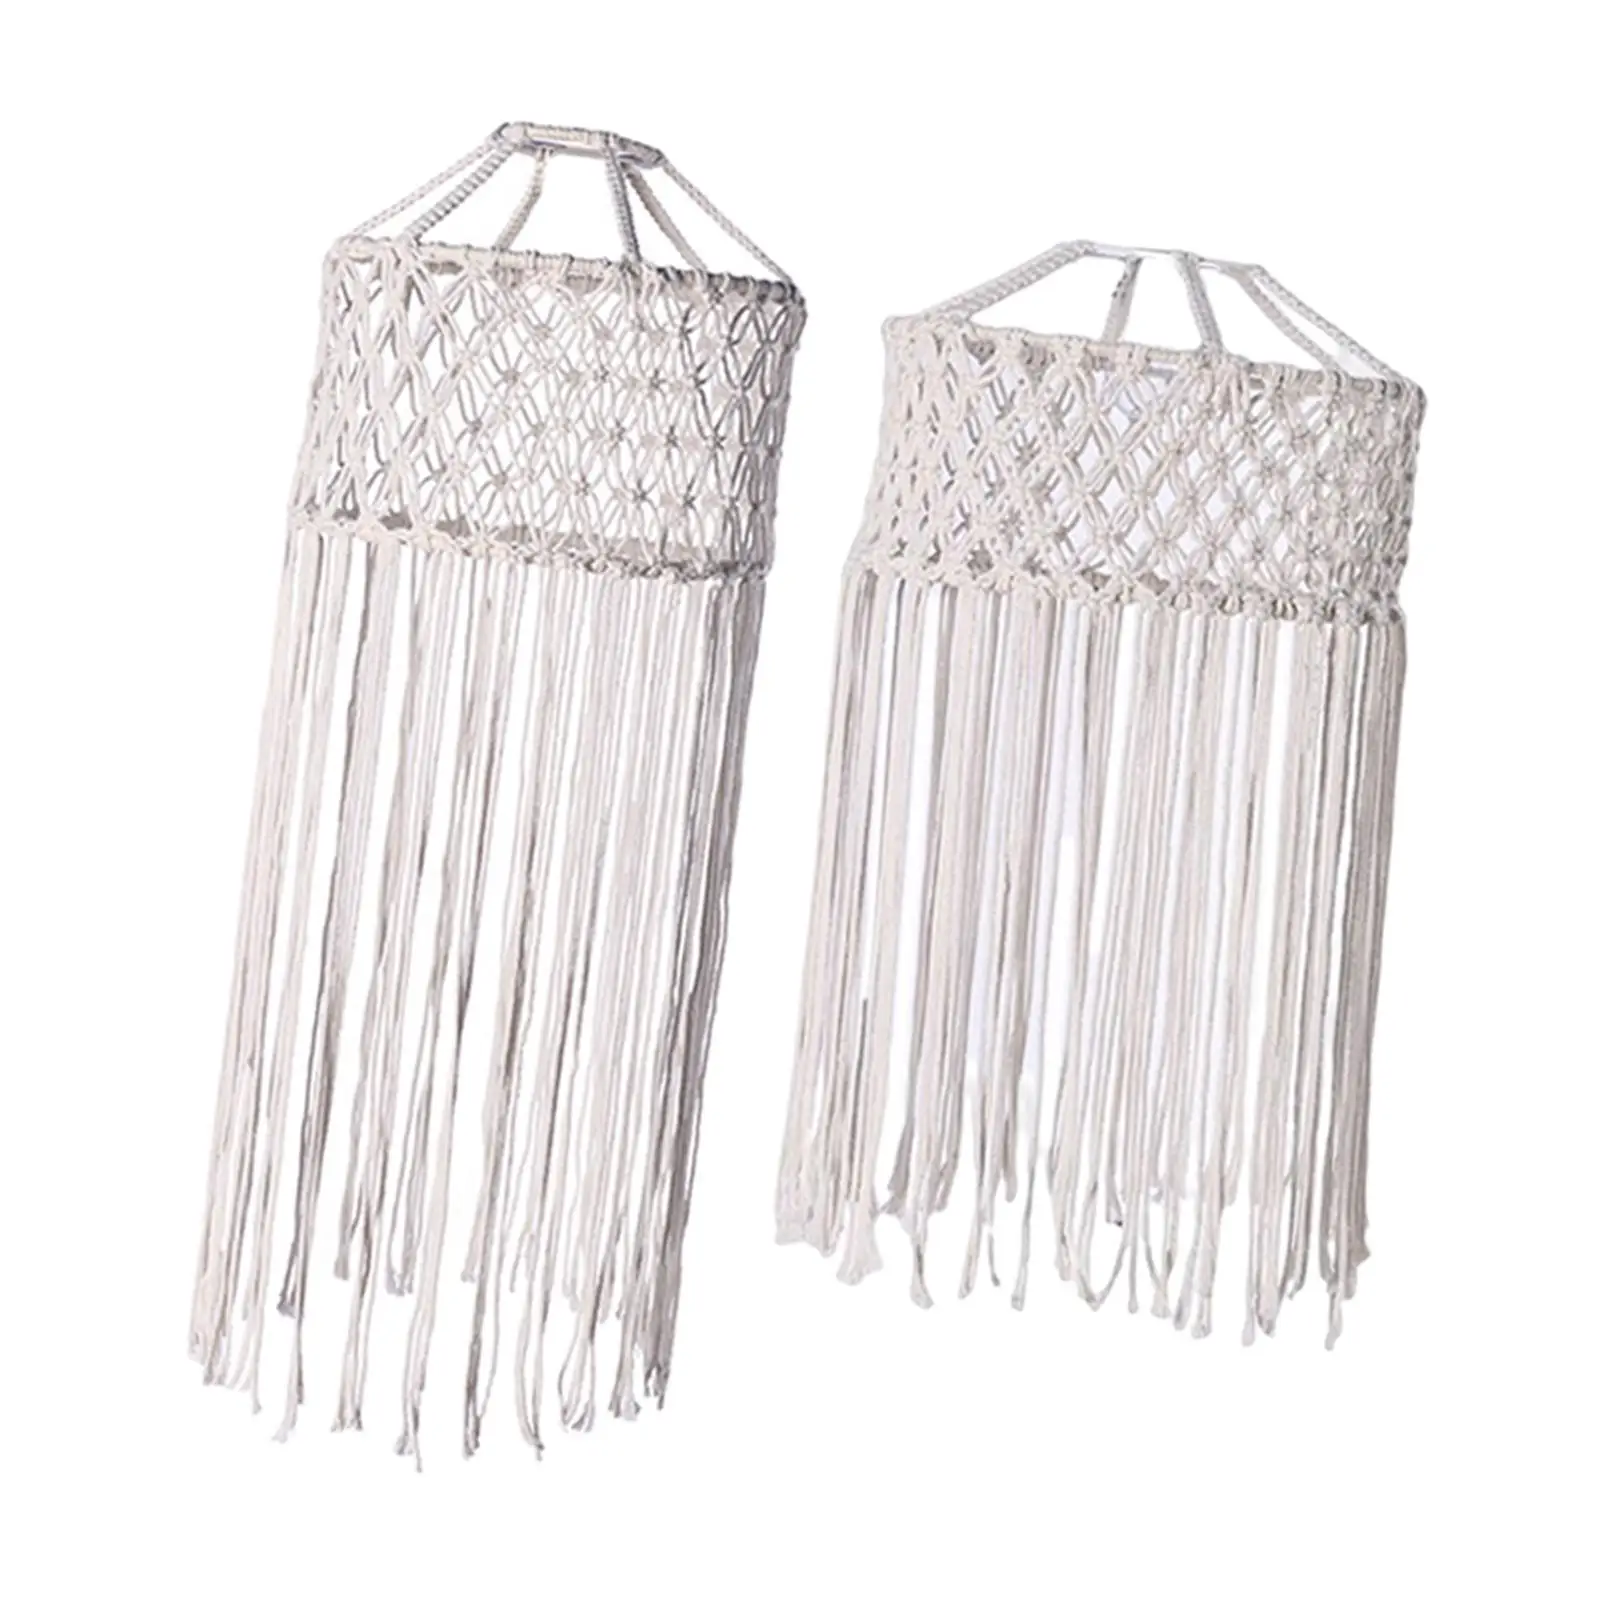 Macrame Lamp Shade, Woven Lampshade White Chandelier Lamp Cover for Backdrop Decorations